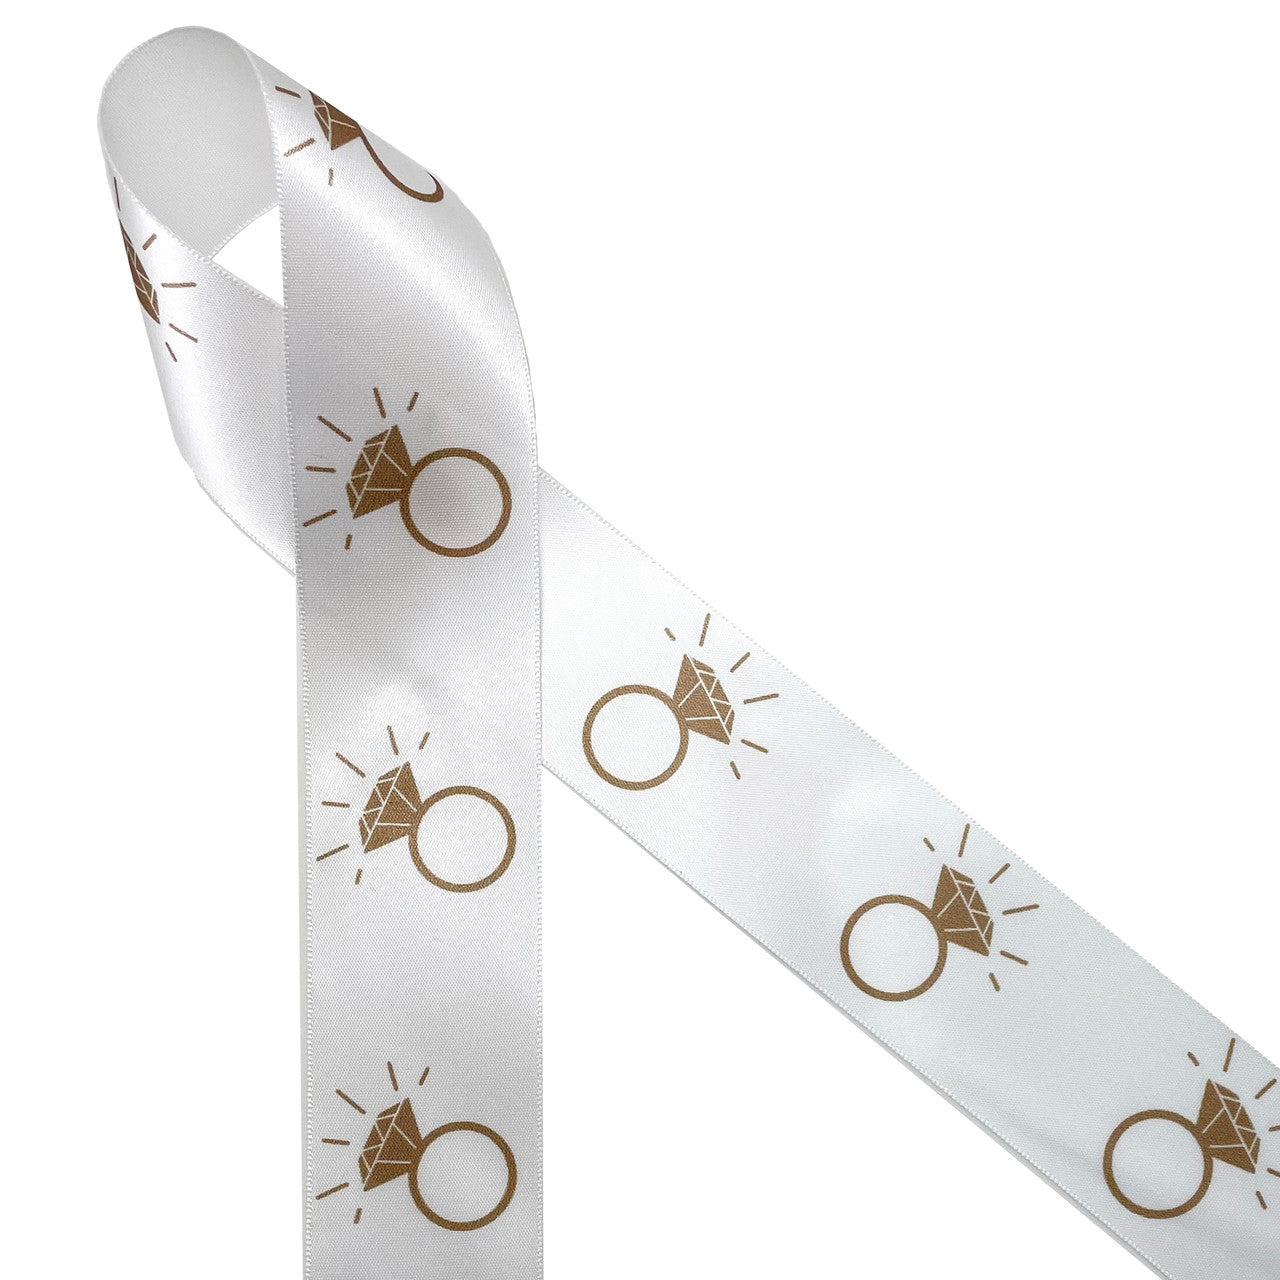 Engagement ring ribbon in gold ink printed on 1.5" white single face satin ribbon is the perfect addition to engagement party  gifts and decor. This fun ribbon is great for bridal showers and wedding gifts too! All our ribbon is designed and printed in the USA